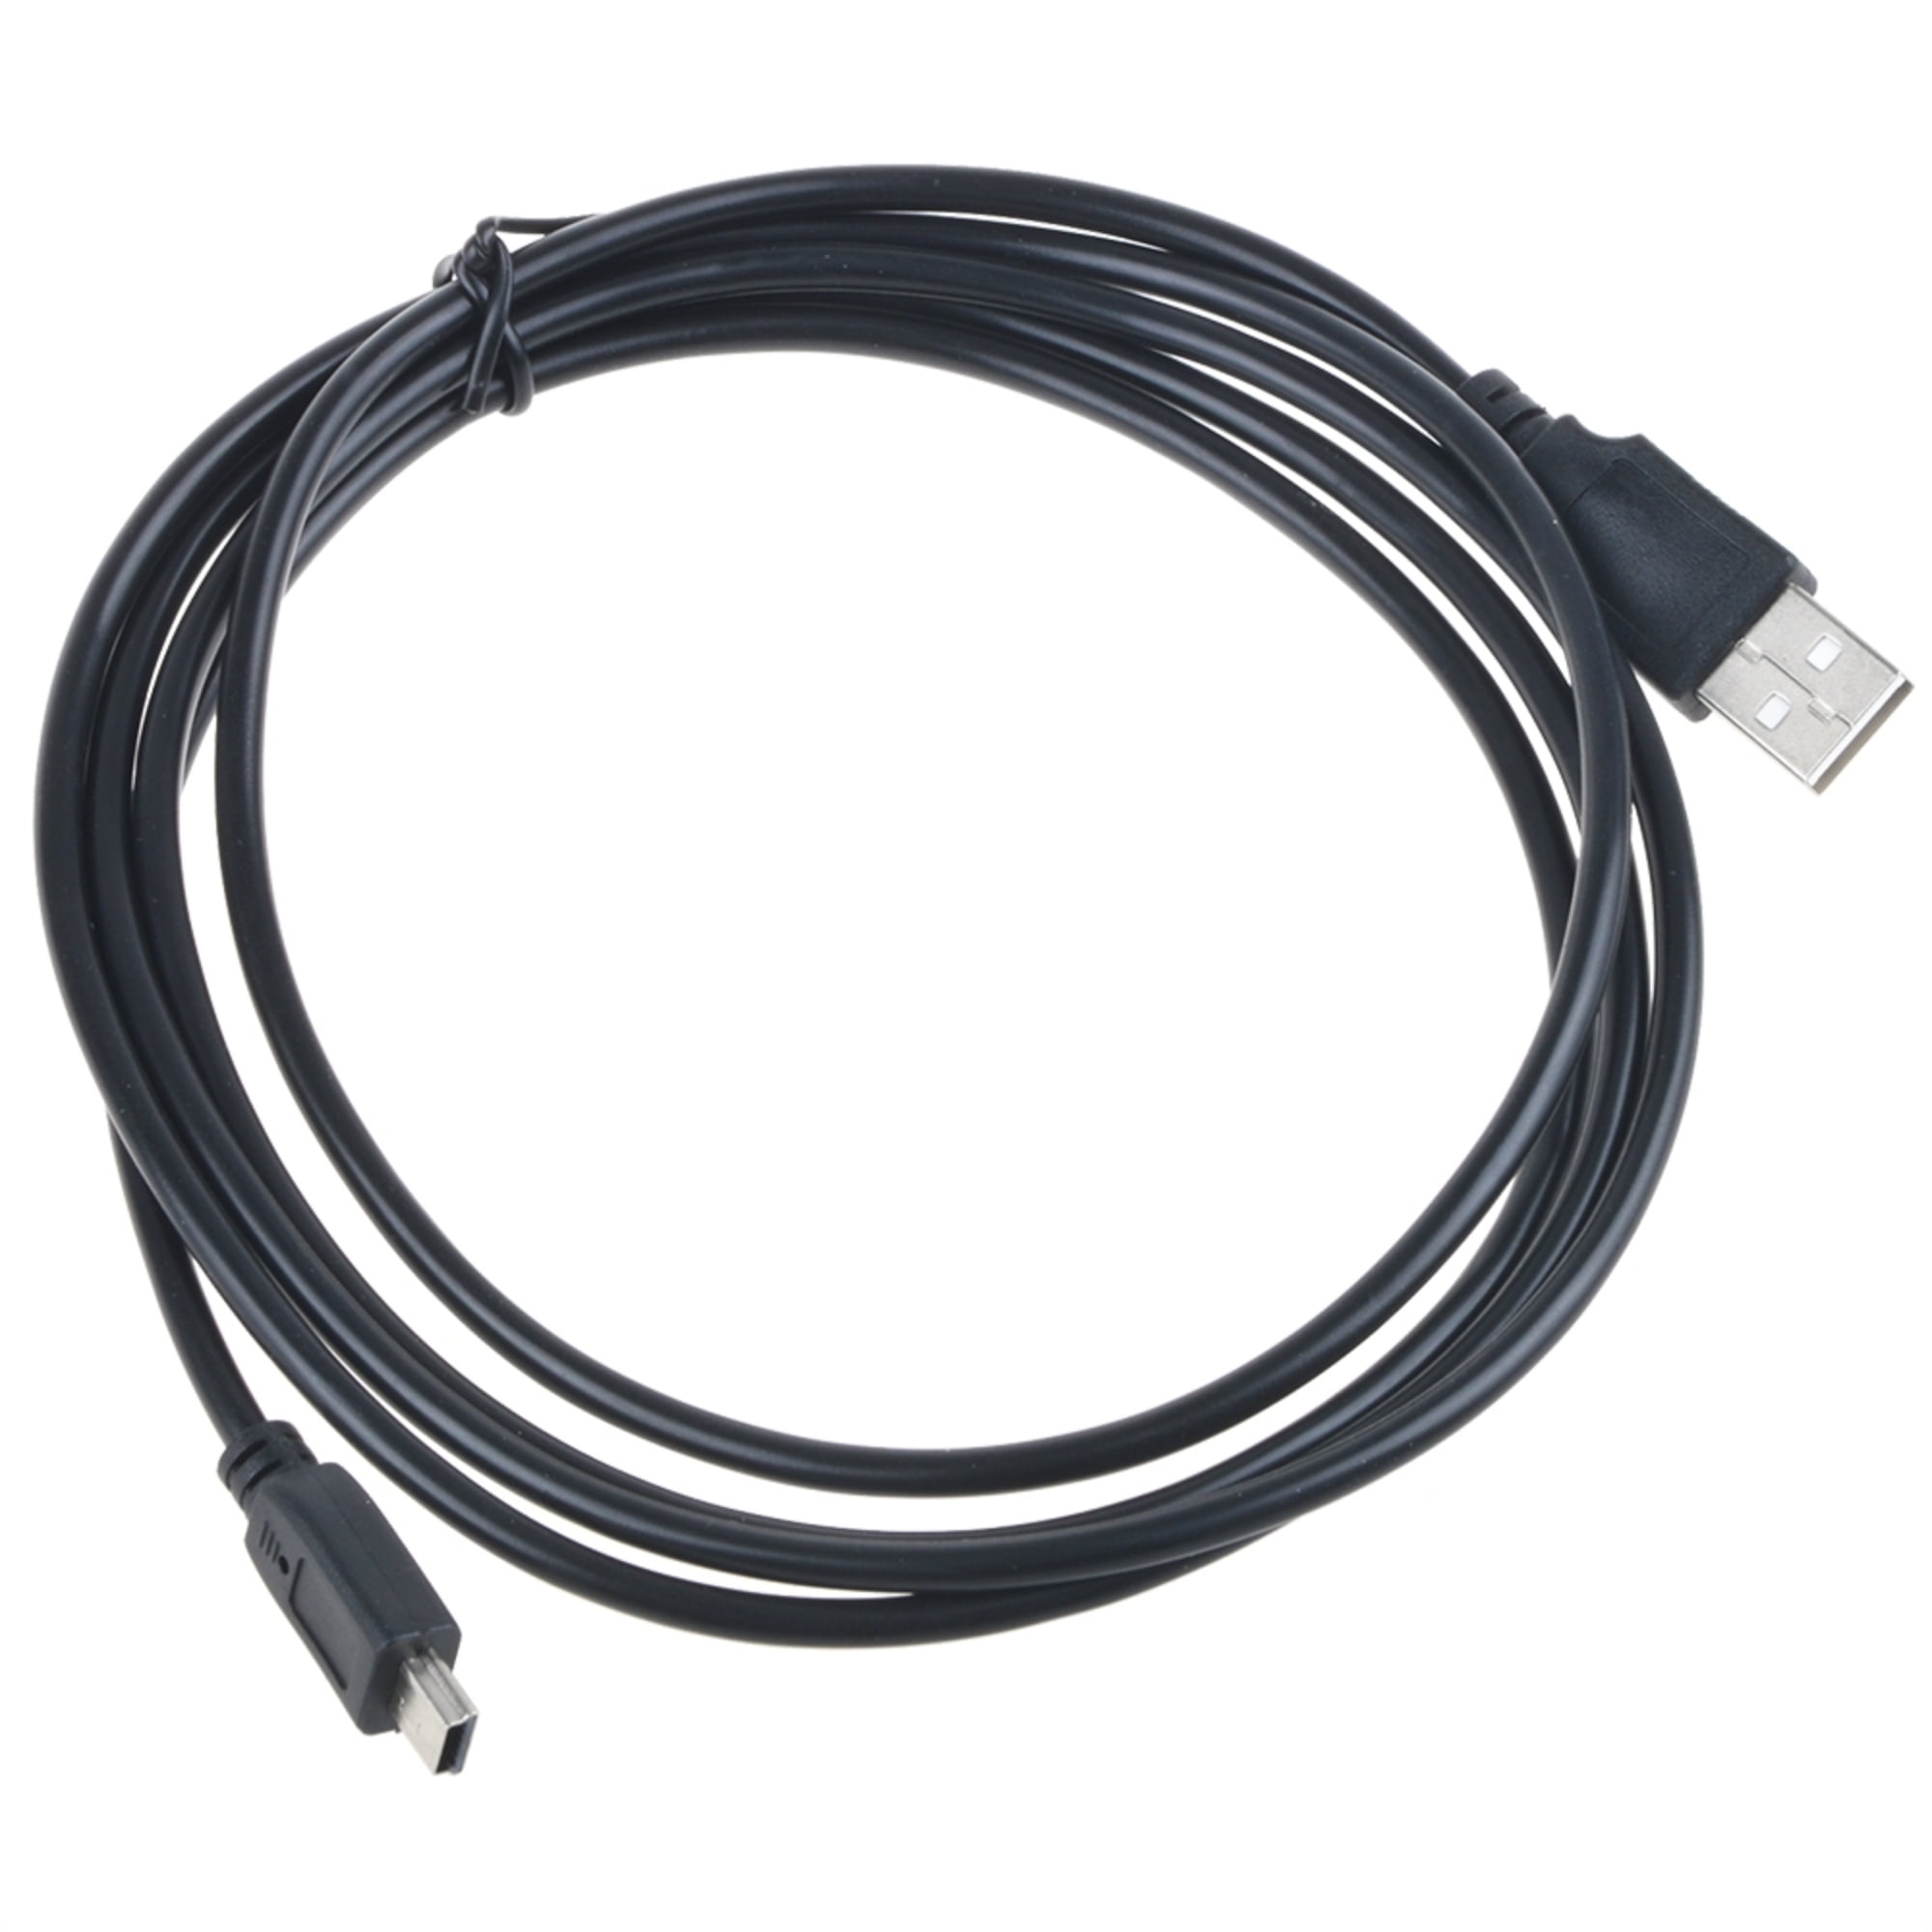 USB Male to Male Cable 15cm - Alphatronic